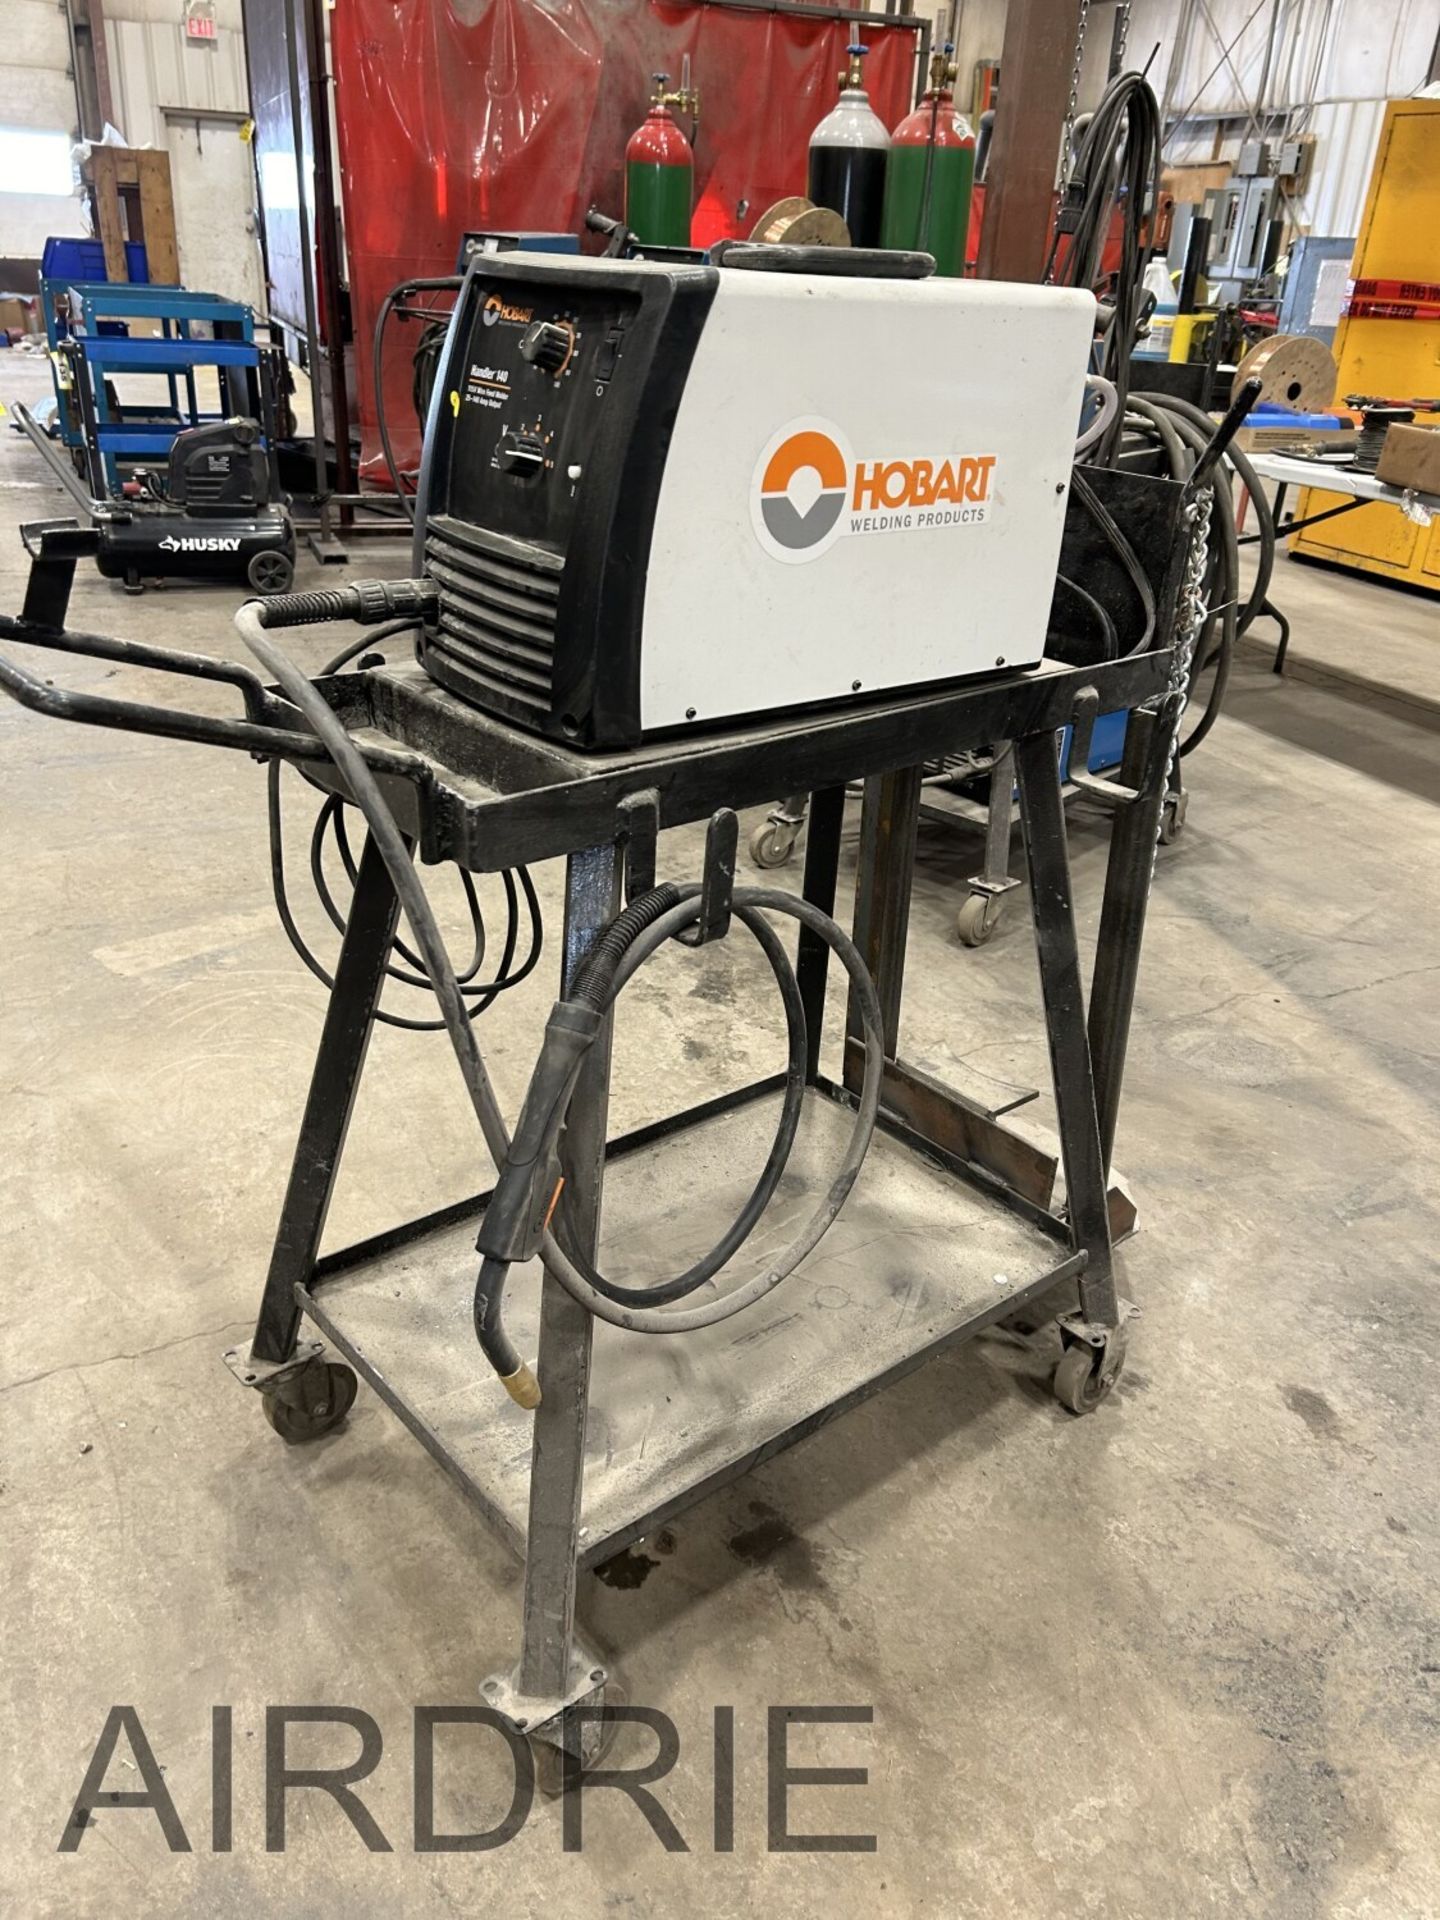 *OFFSITE* HOBART HANDLER 140 115V WIRE FEED WELDER 25-140 AMP OUTFEED ON CART S/N ND020403Y - Image 2 of 9